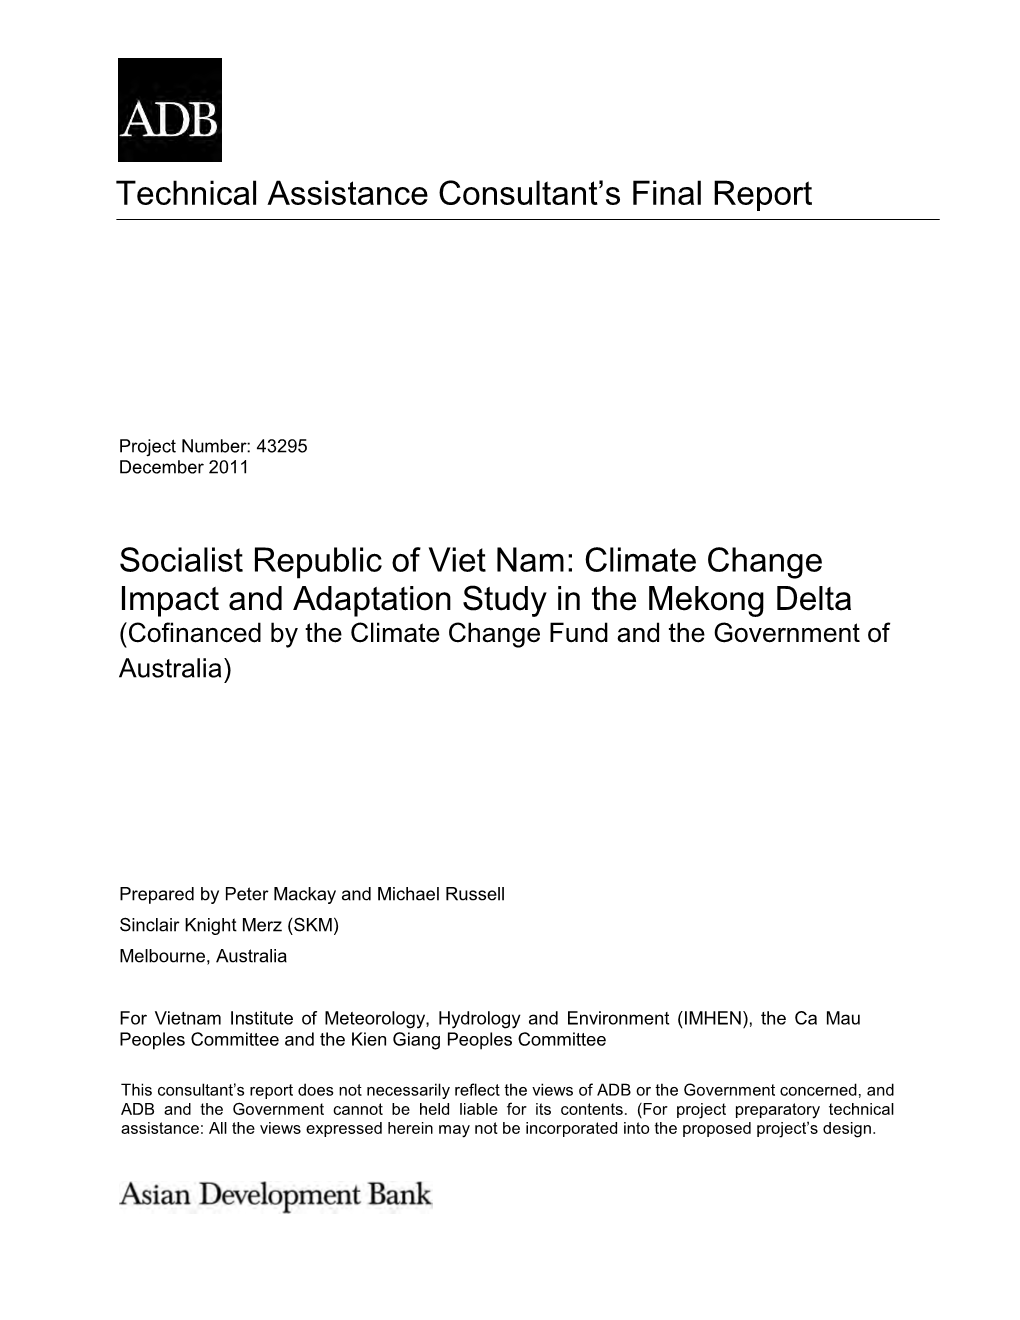 TACR: Viet Nam: Climate Change Impact and Adaptation Study in The